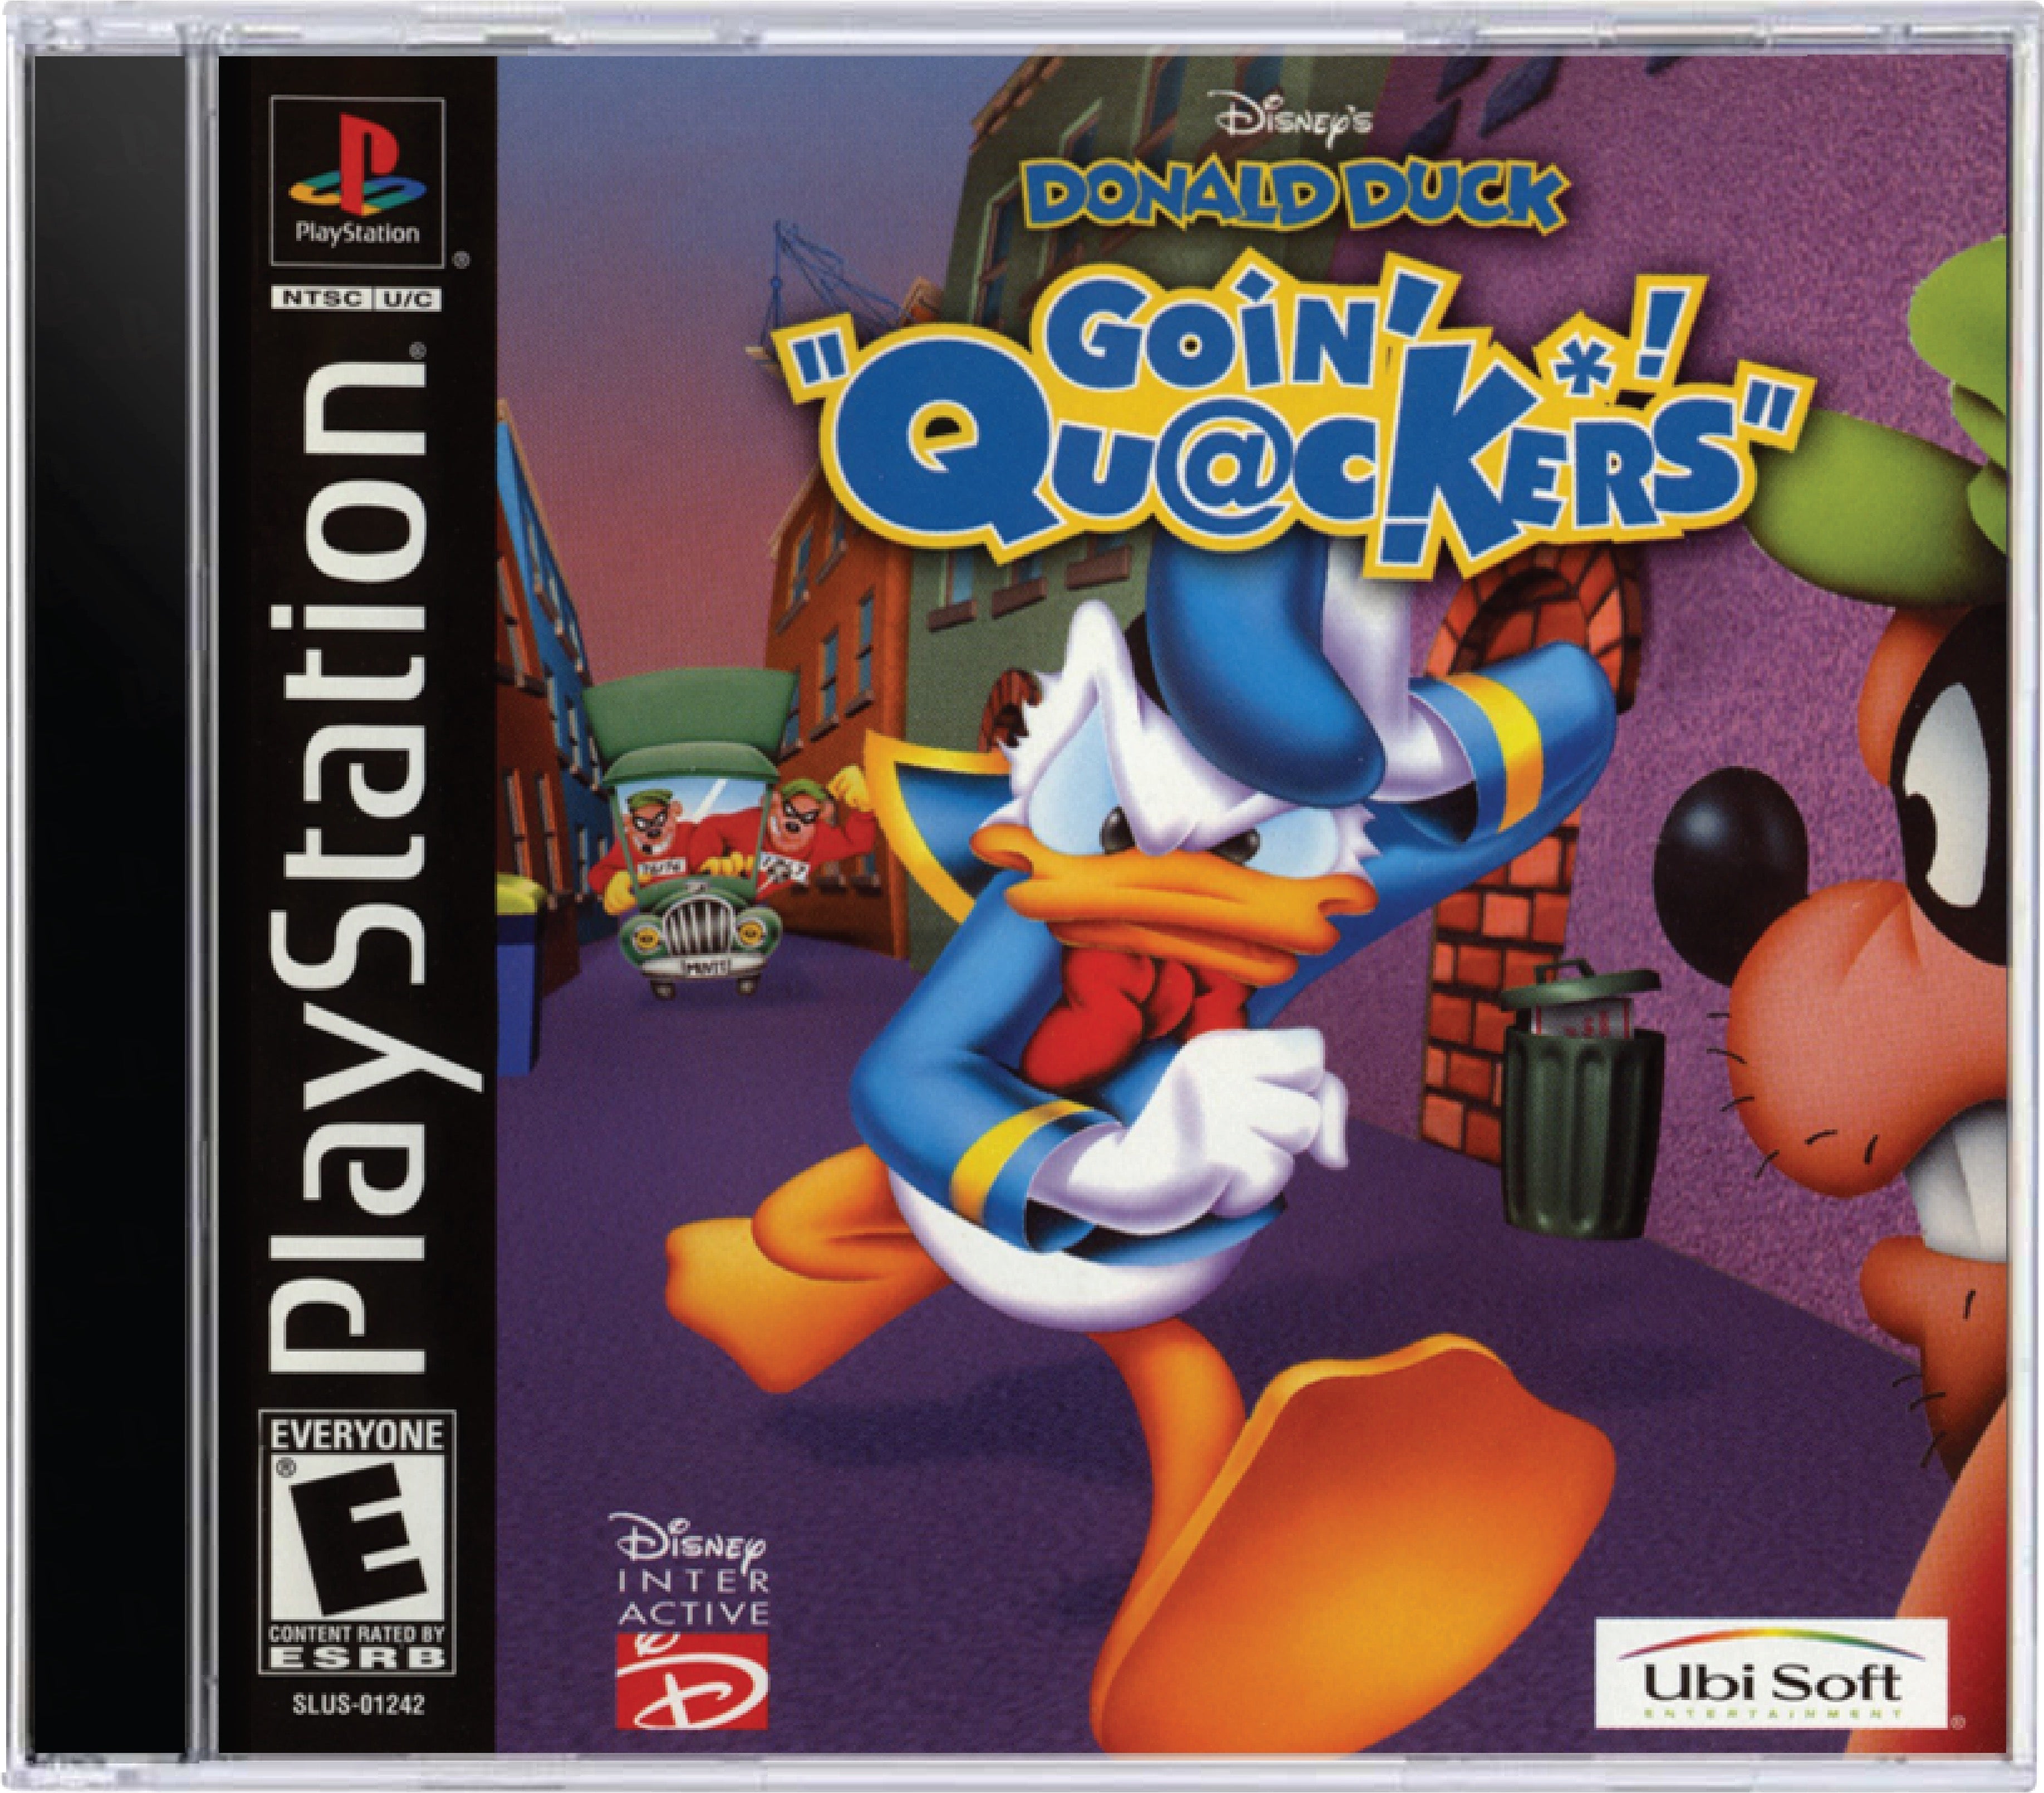 Donald Duck Going Quackers Cover Art and Product Photo